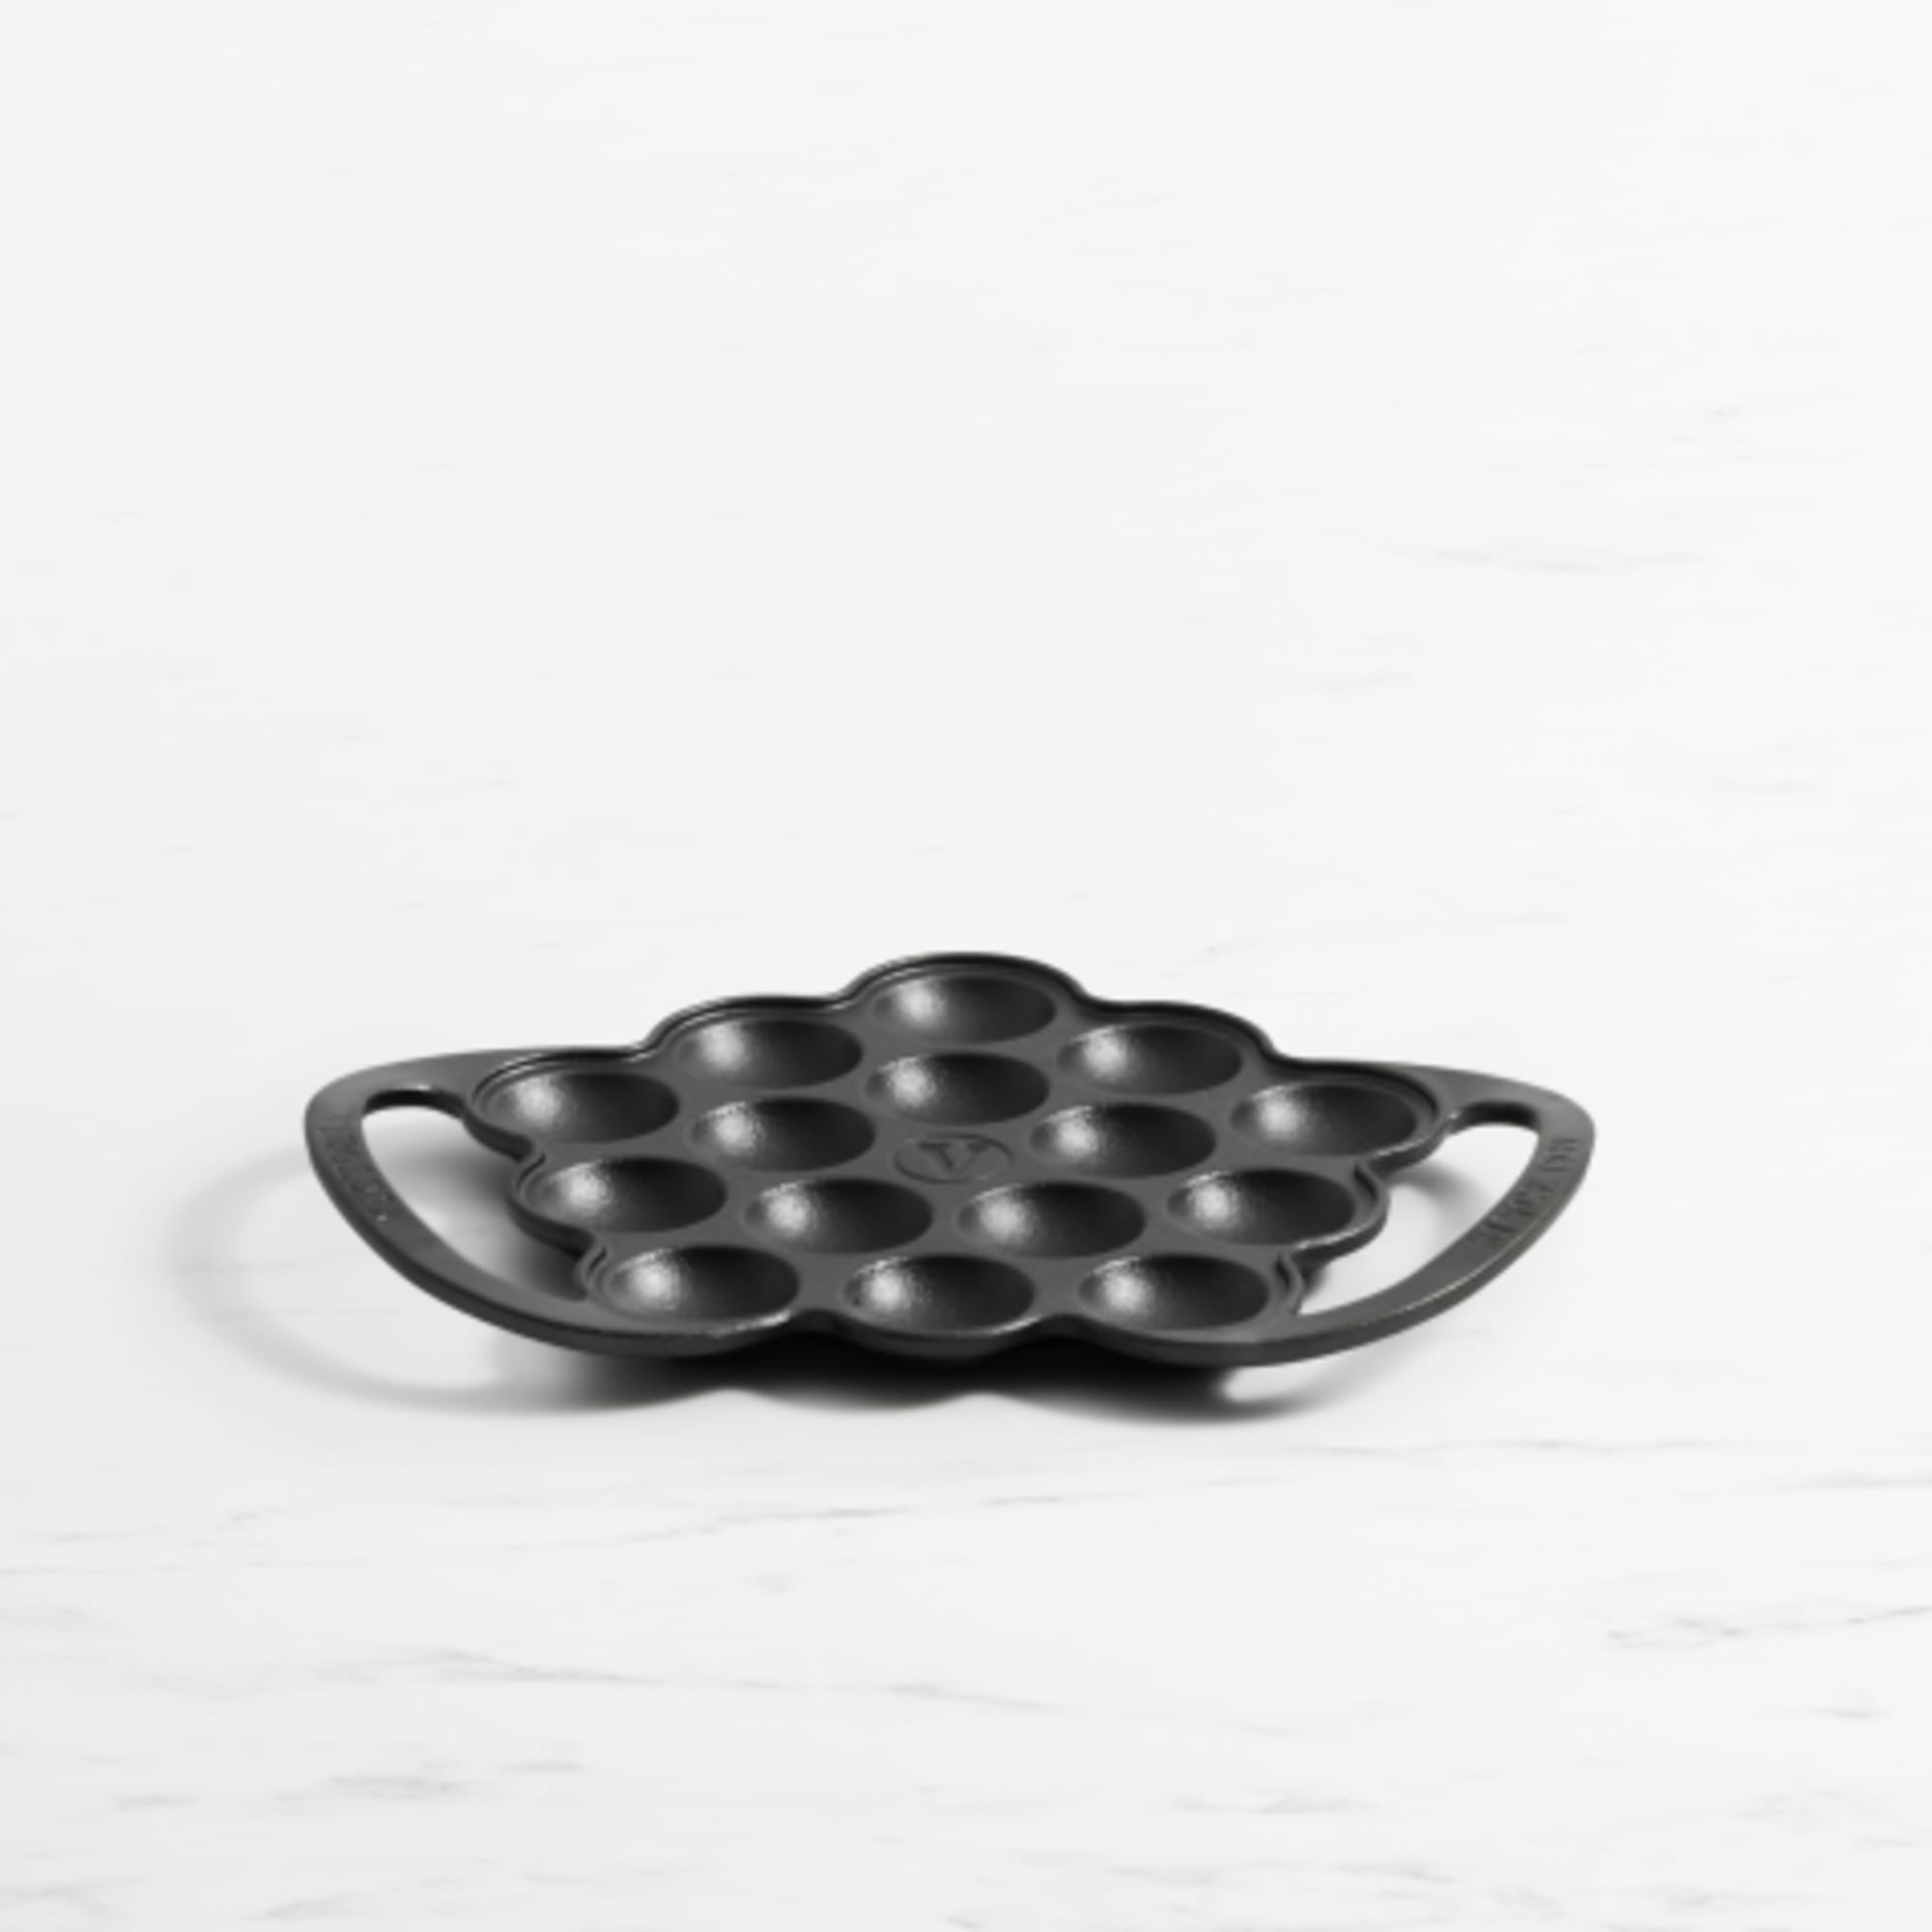 Victoria Cast Iron Poffertjes Dutch Pancake Pan with Loop Handles,  Preseasoned with Flaxseed Oil, Made in Colombia